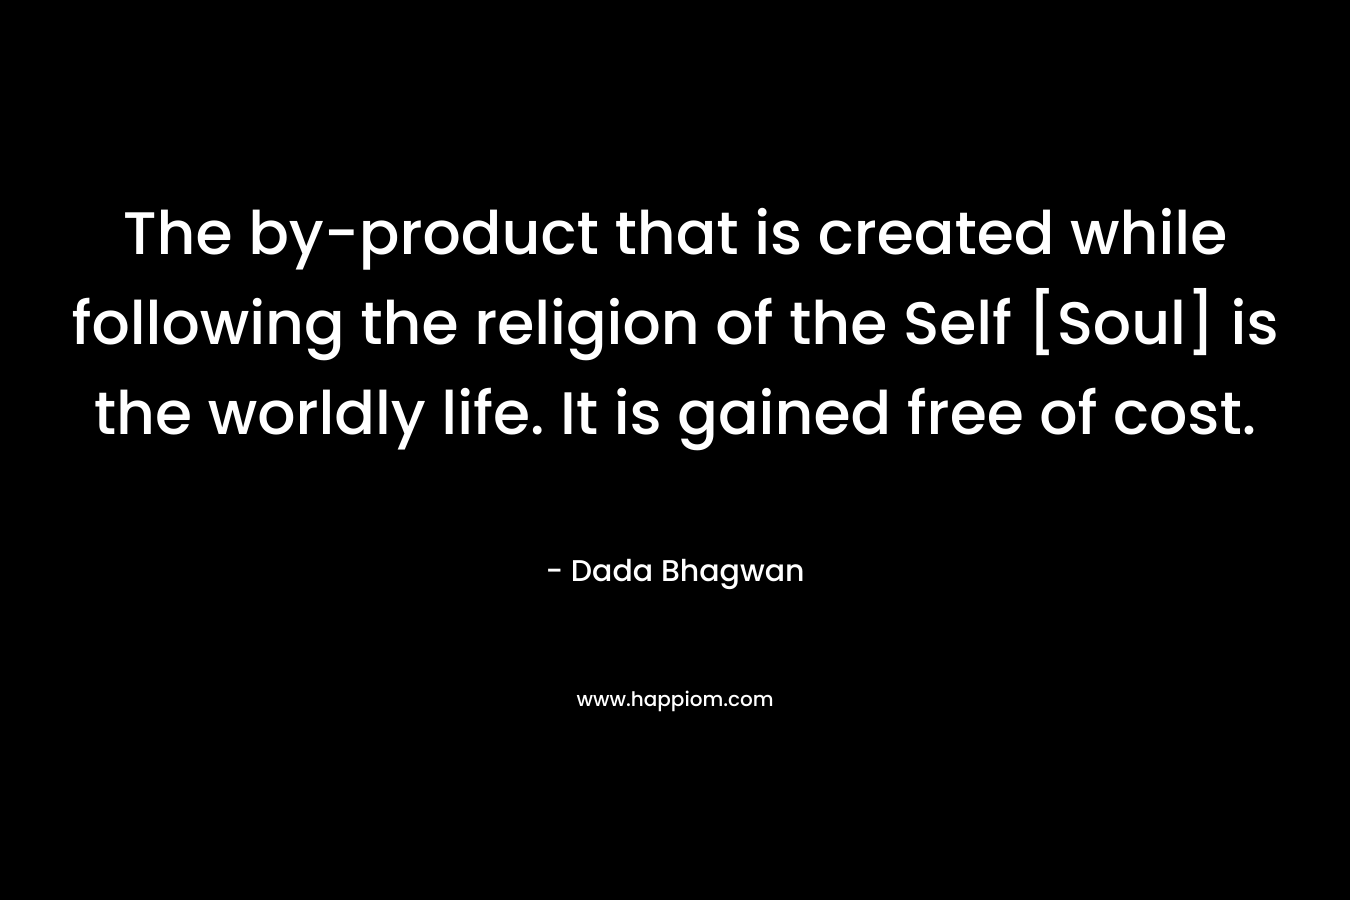 The by-product that is created while following the religion of the Self [Soul] is the worldly life. It is gained free of cost.